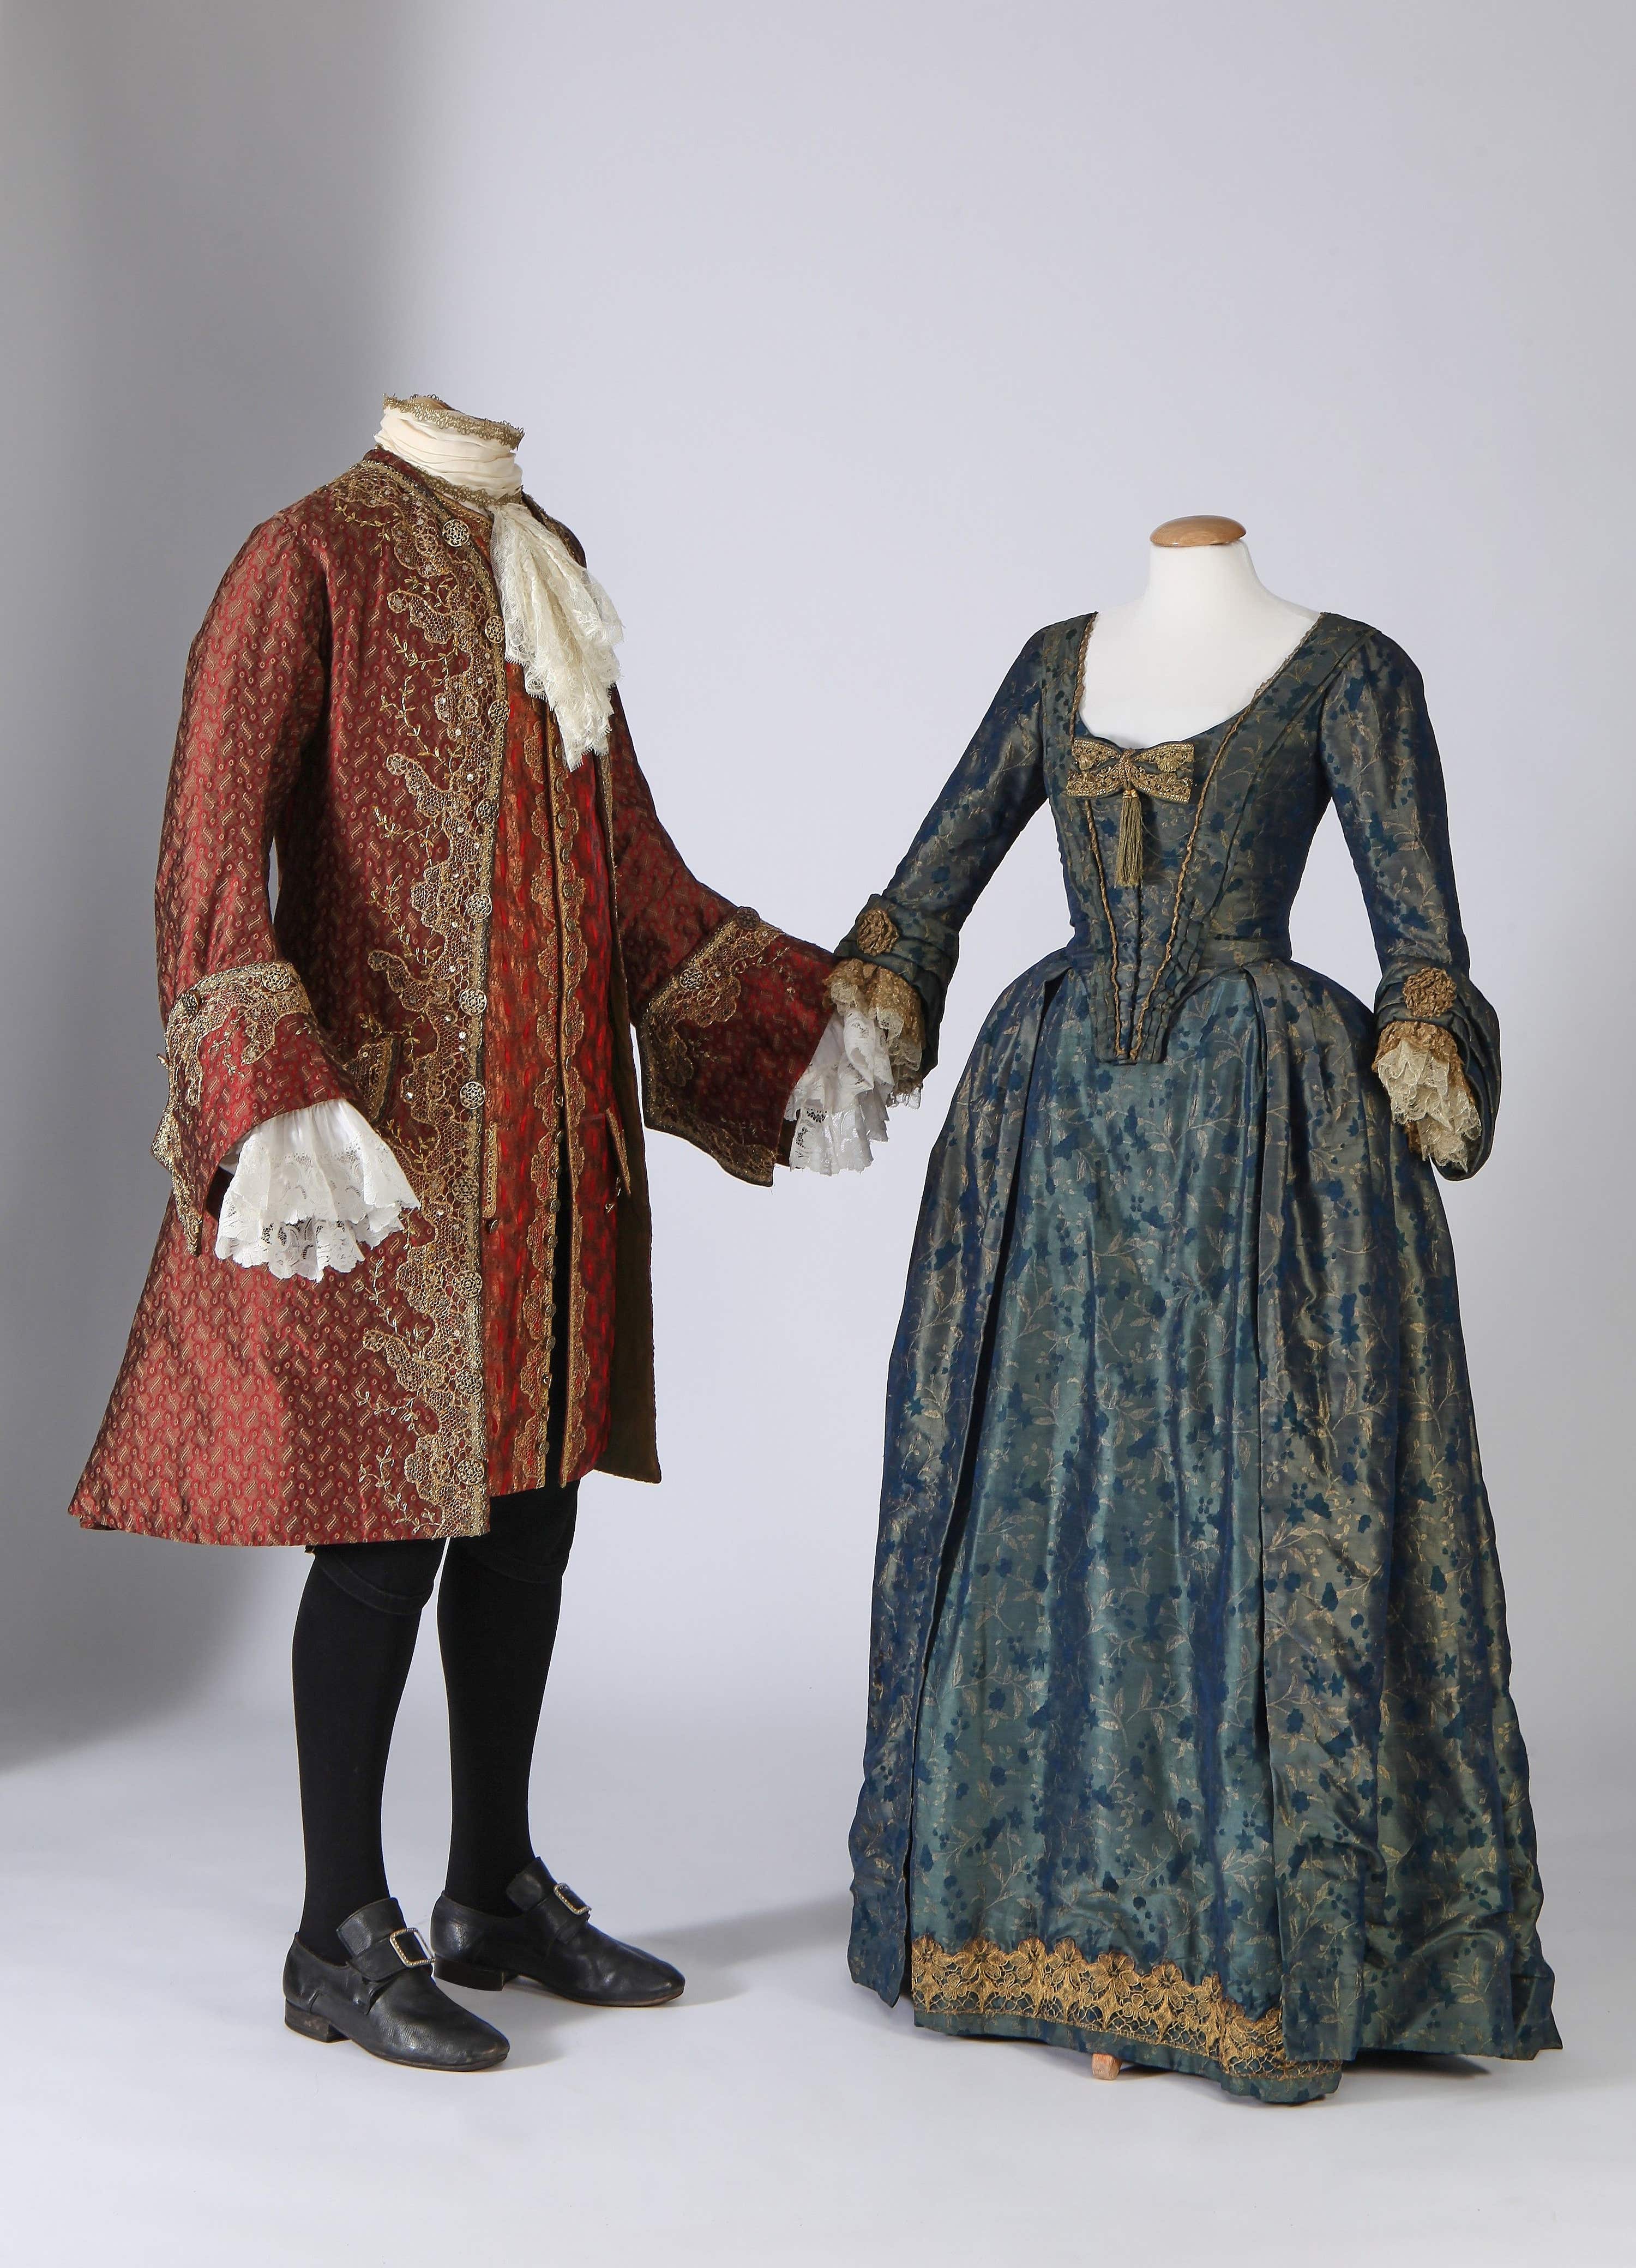 Heath Ledger and Sienna Miller’s costumes from 2004’s Casanova.